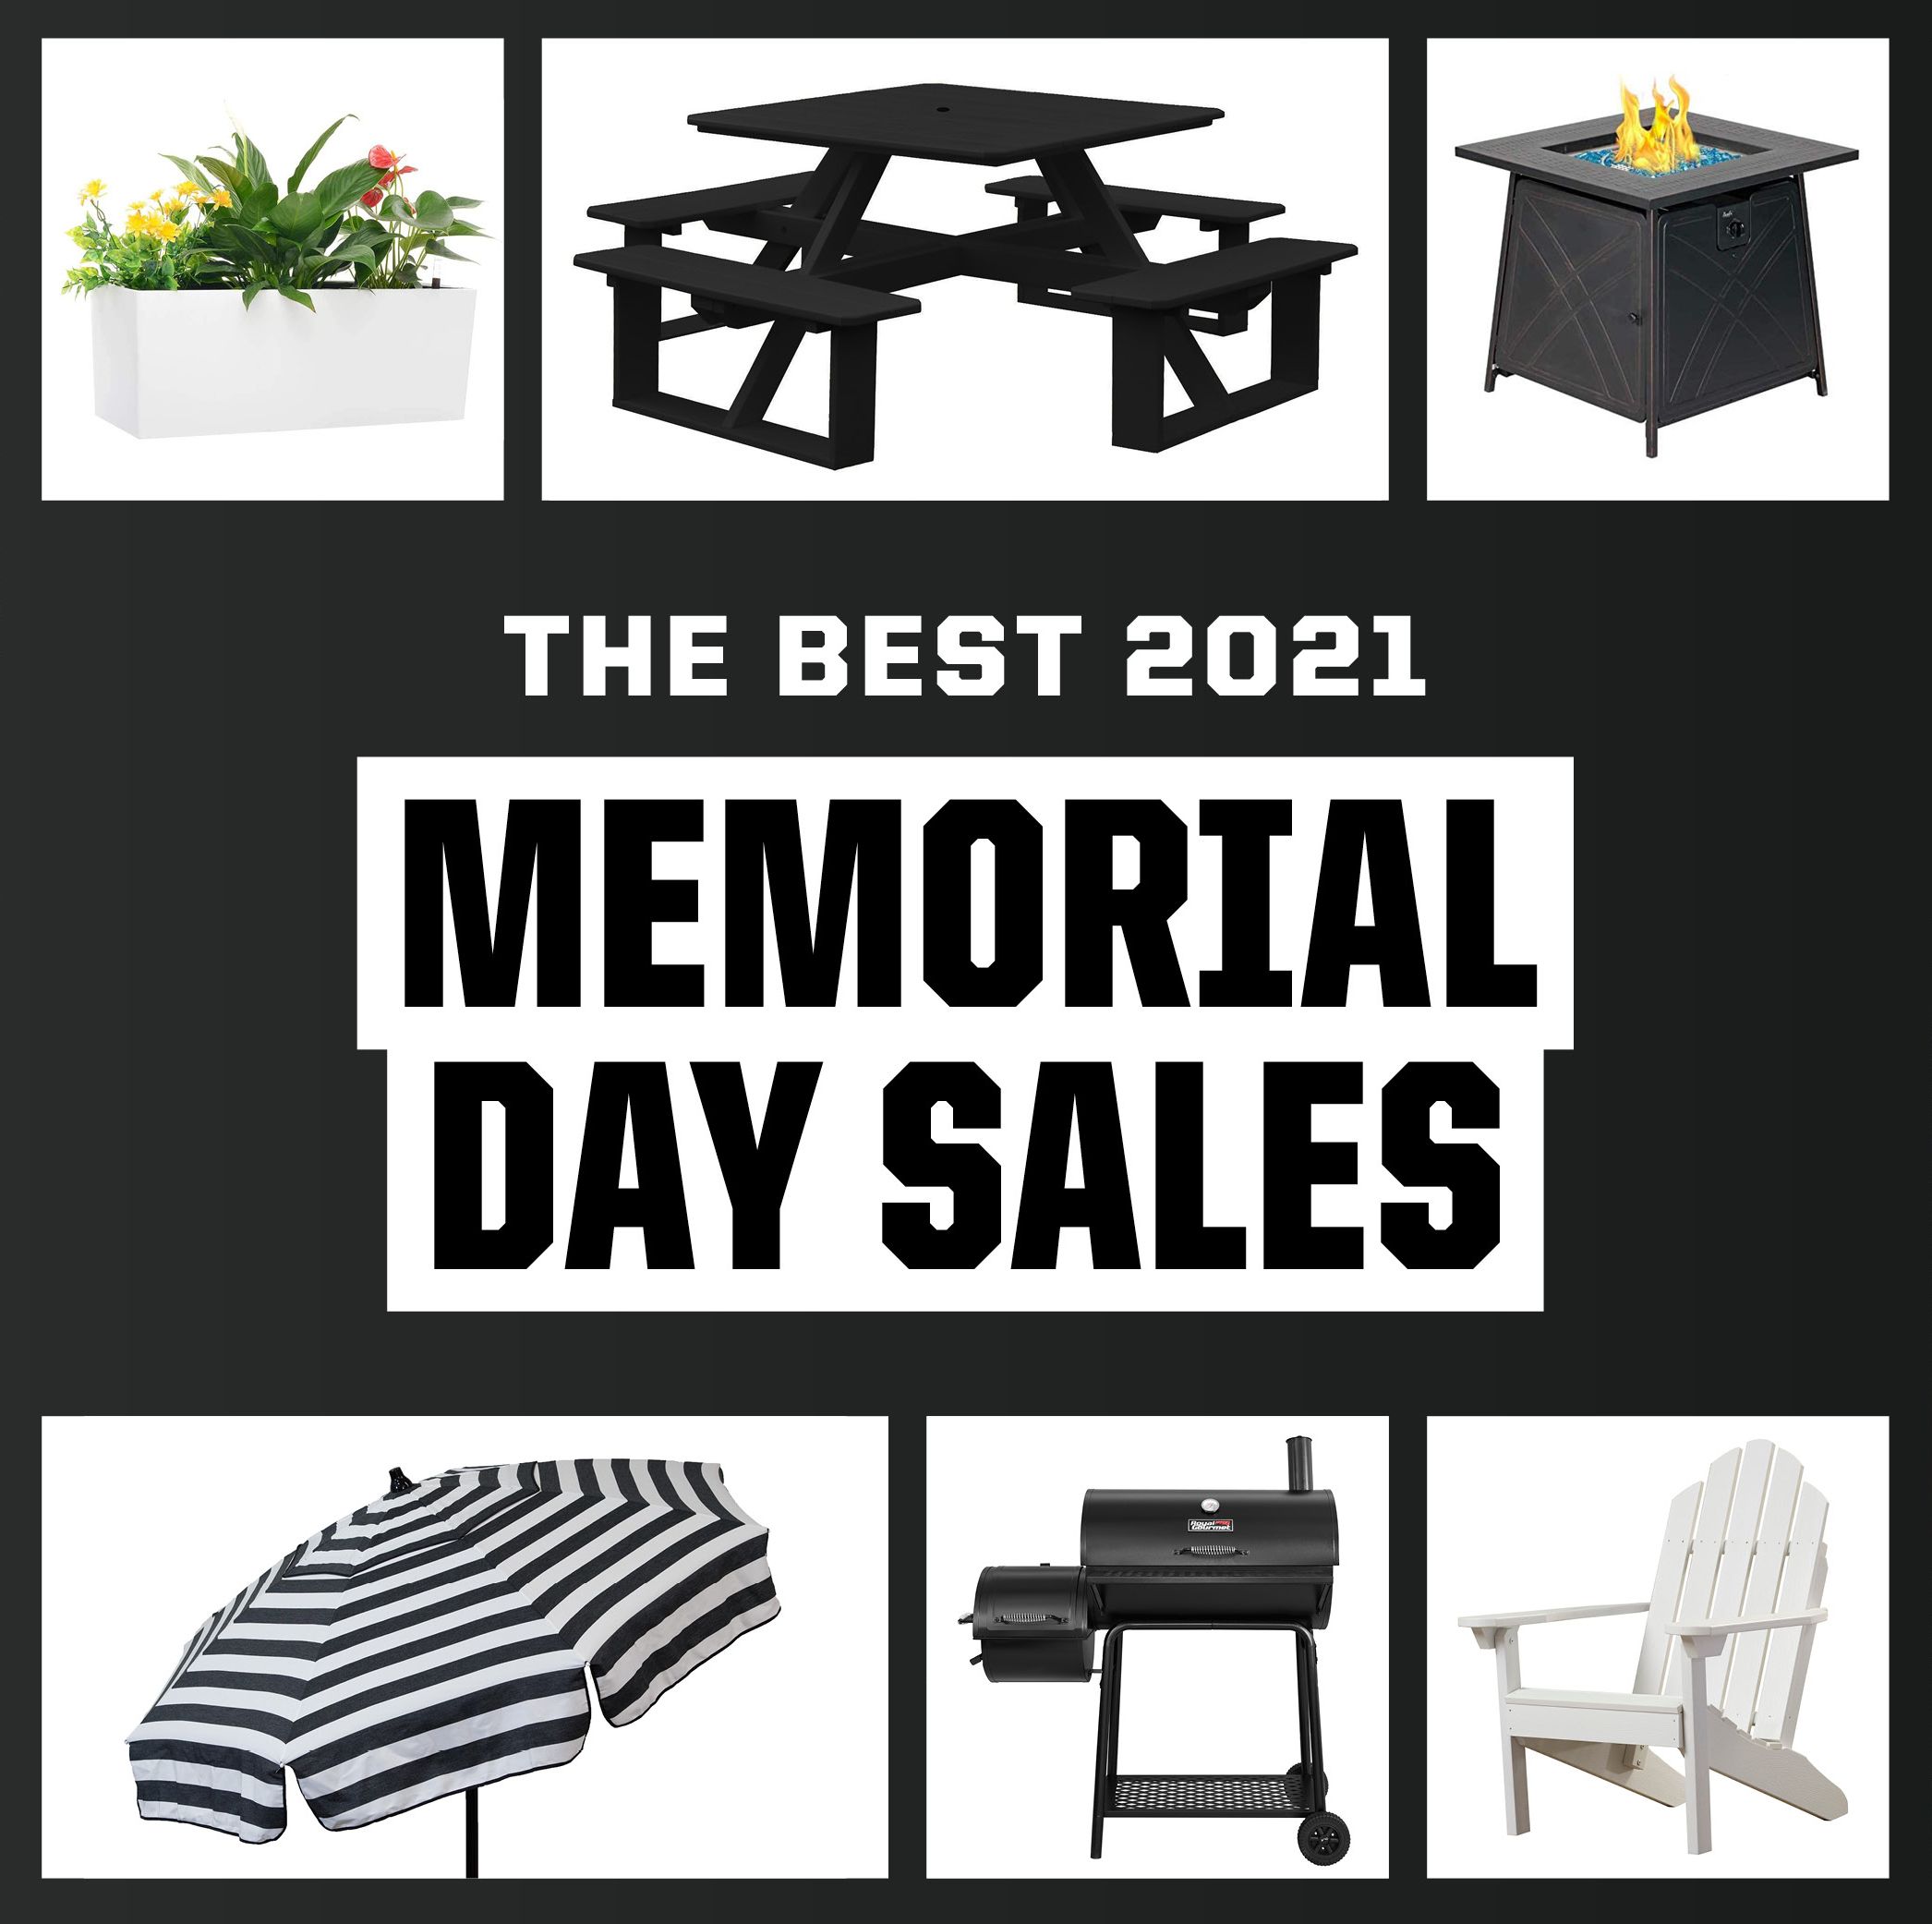 Get Your Home Ready for Memorial Day Weekend With The Best Items on Sale Now